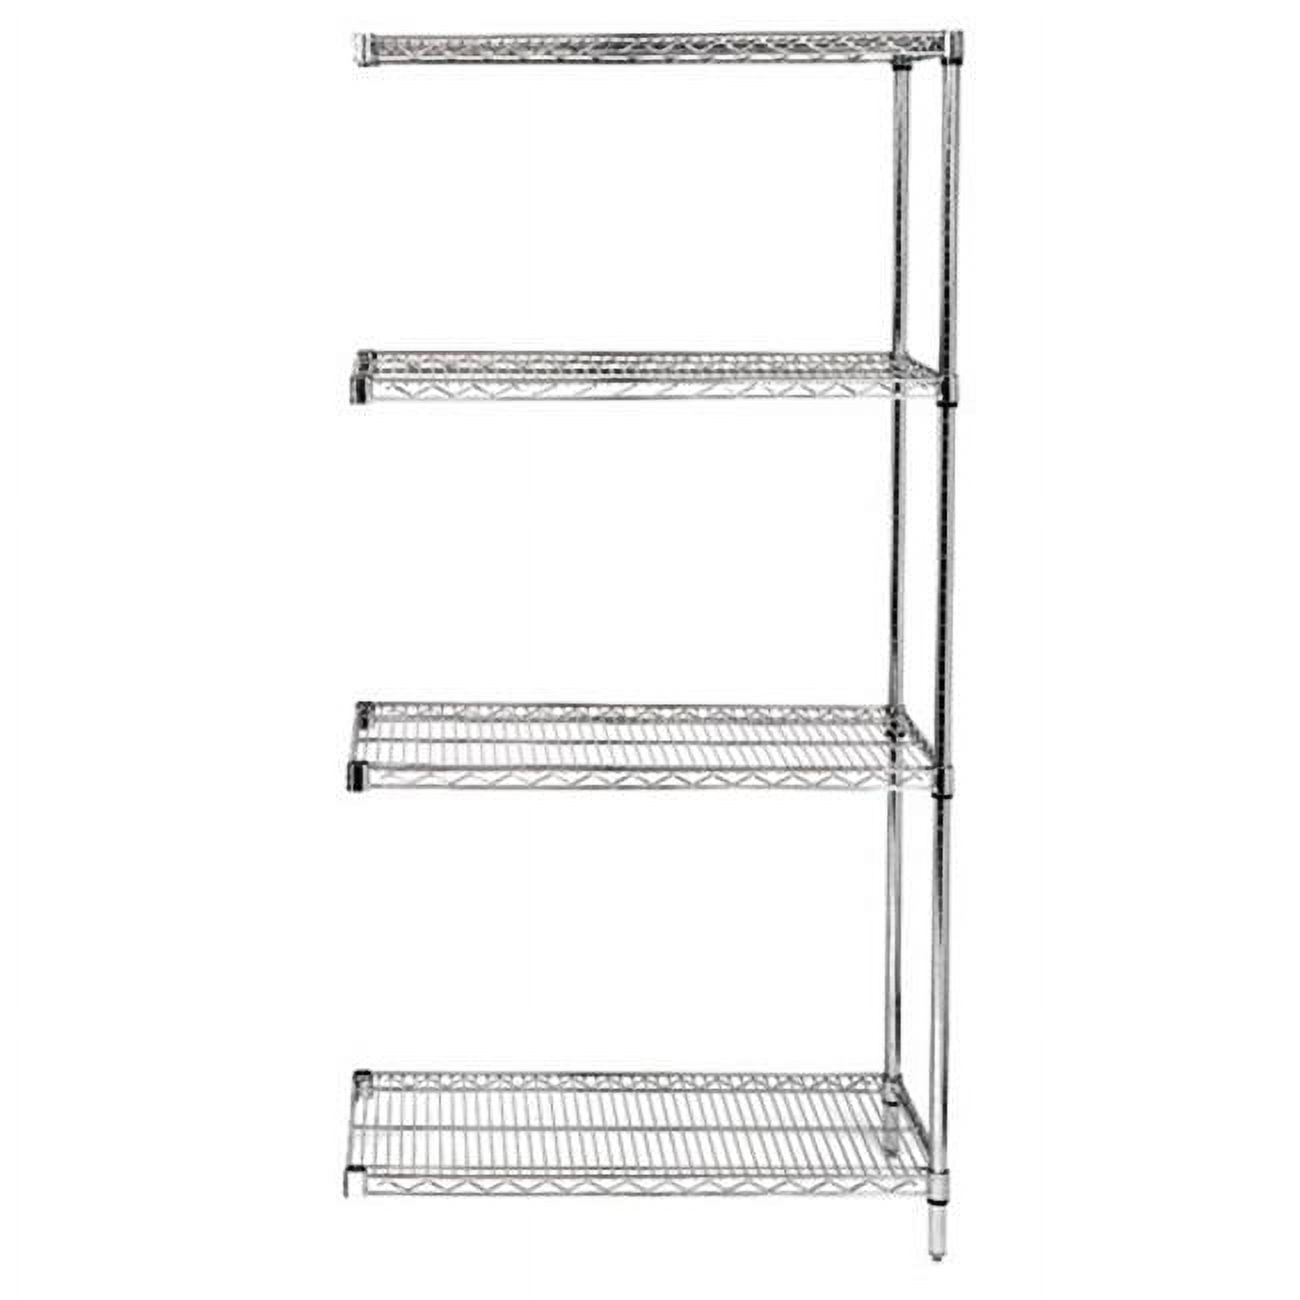 4-Shelf, Stainless Steel Wire Shelving Add-On Unit - 14 x 72 x 63 in. - image 1 of 1